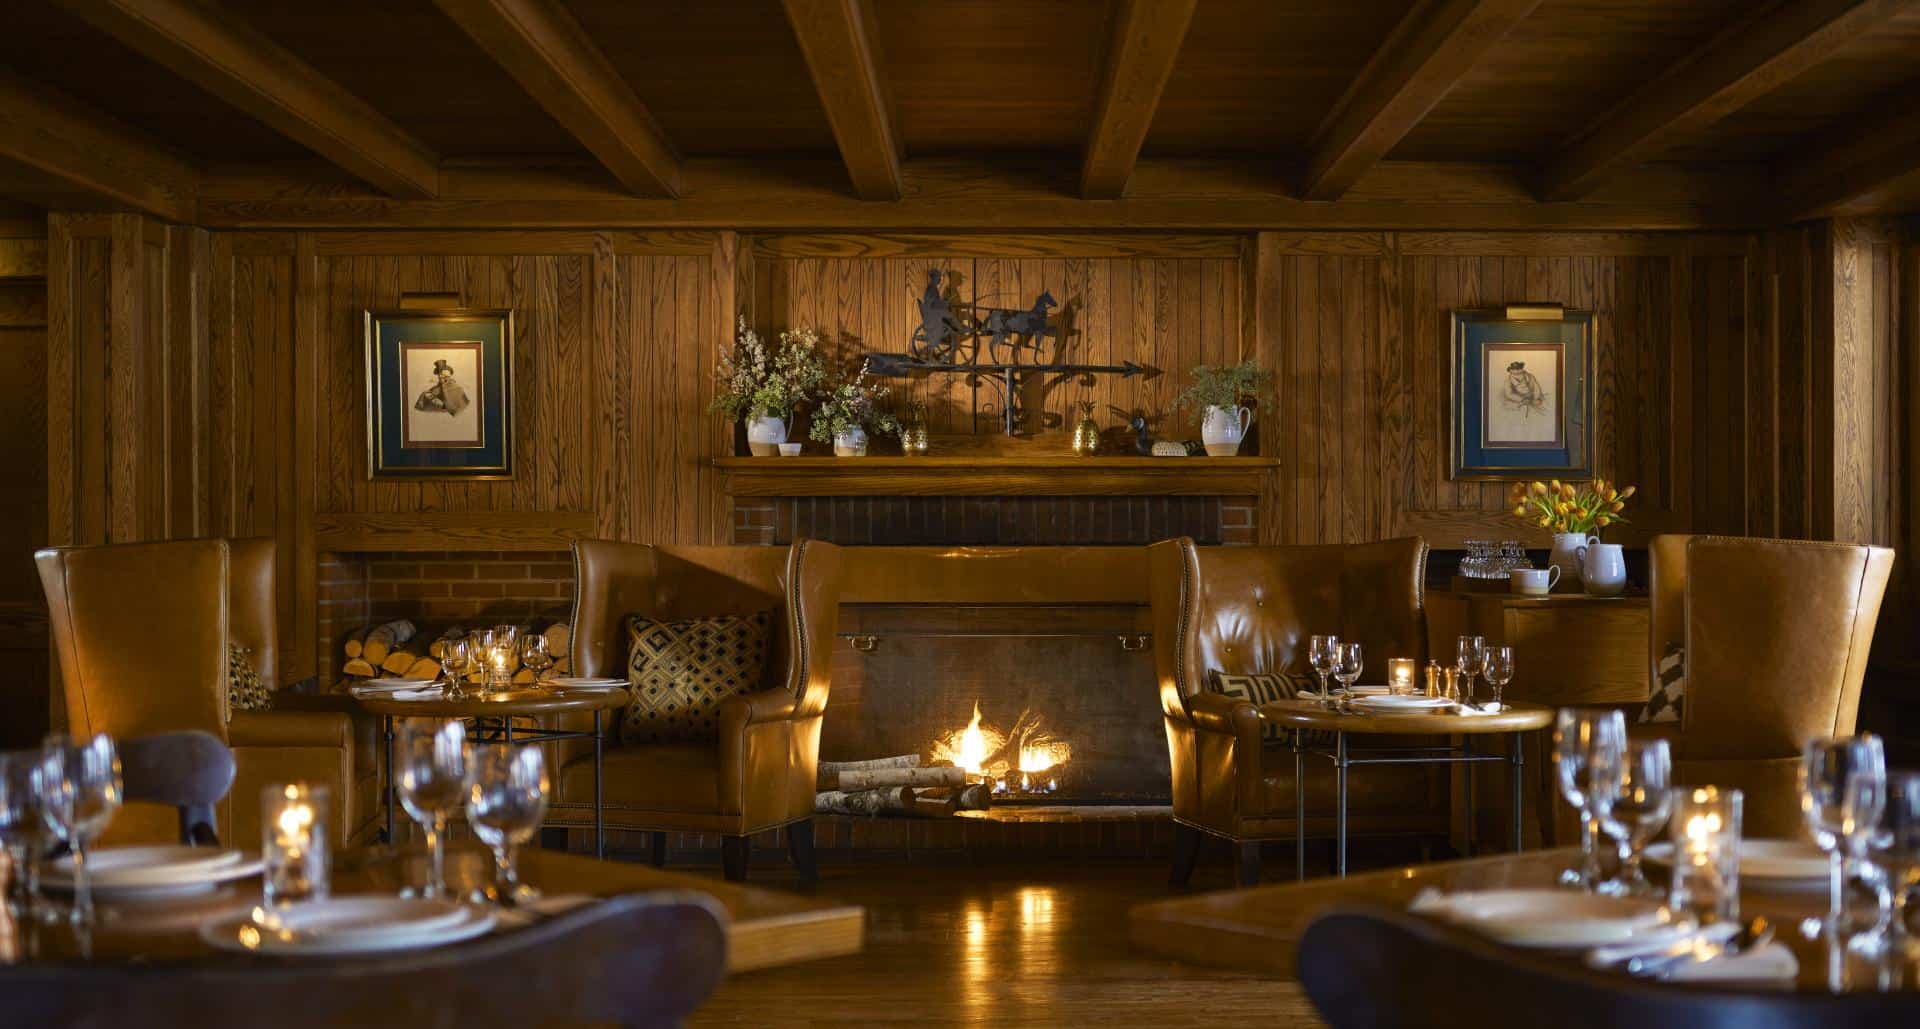 Woodstock Inn - Richardsons Tavern Dining with Fireplace